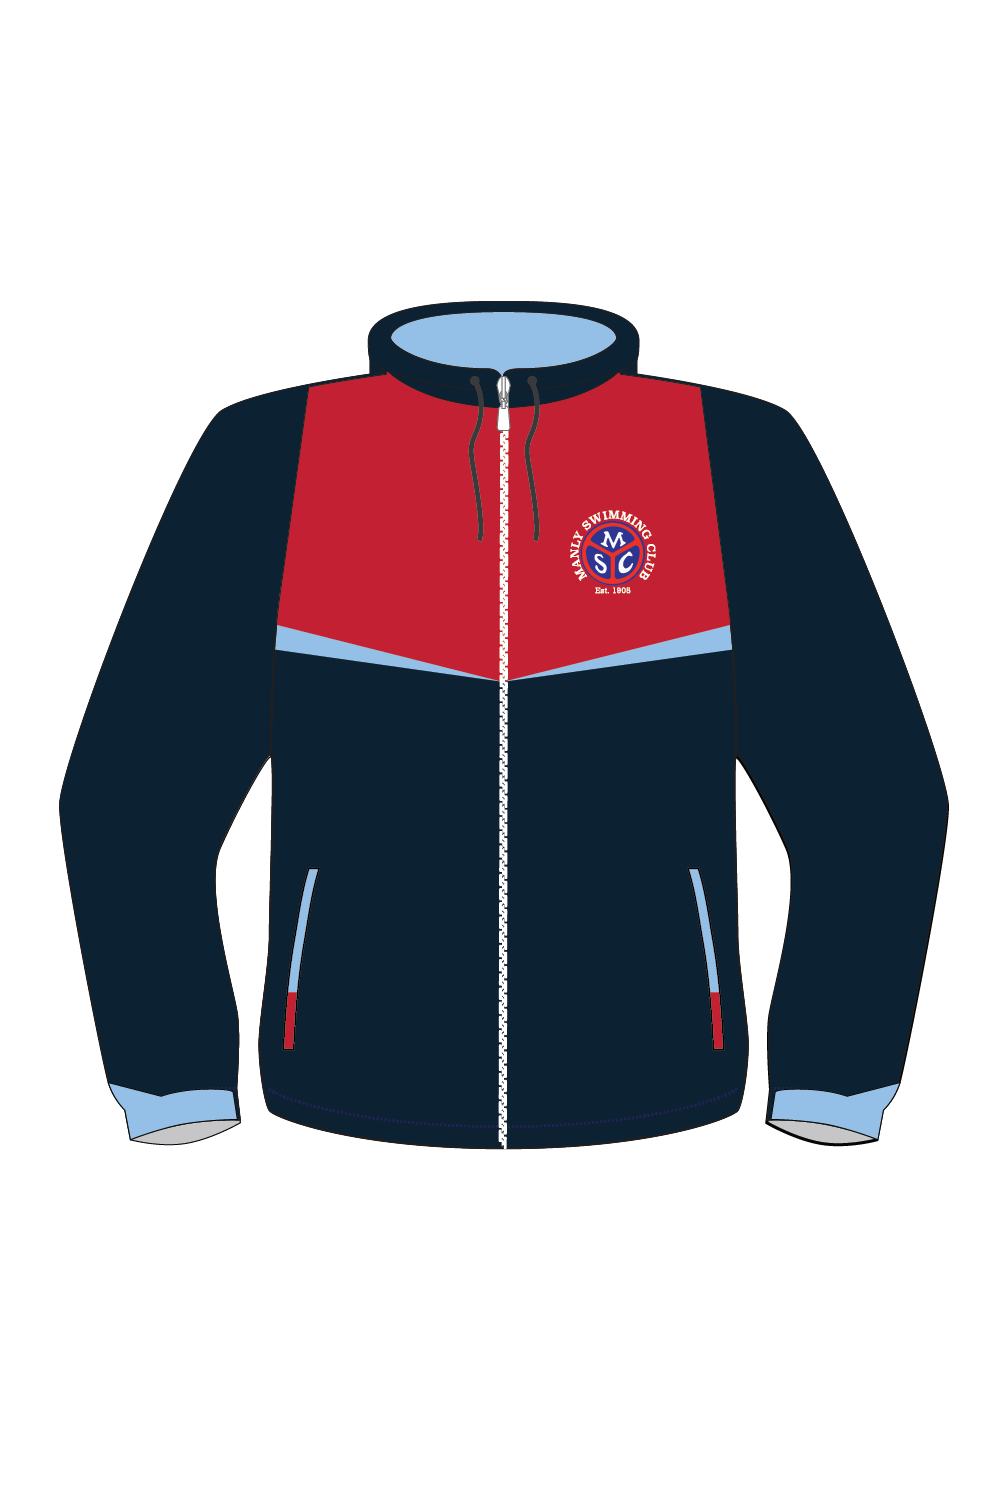 Manly Swimming Club Tracksuit Kid's Jacket